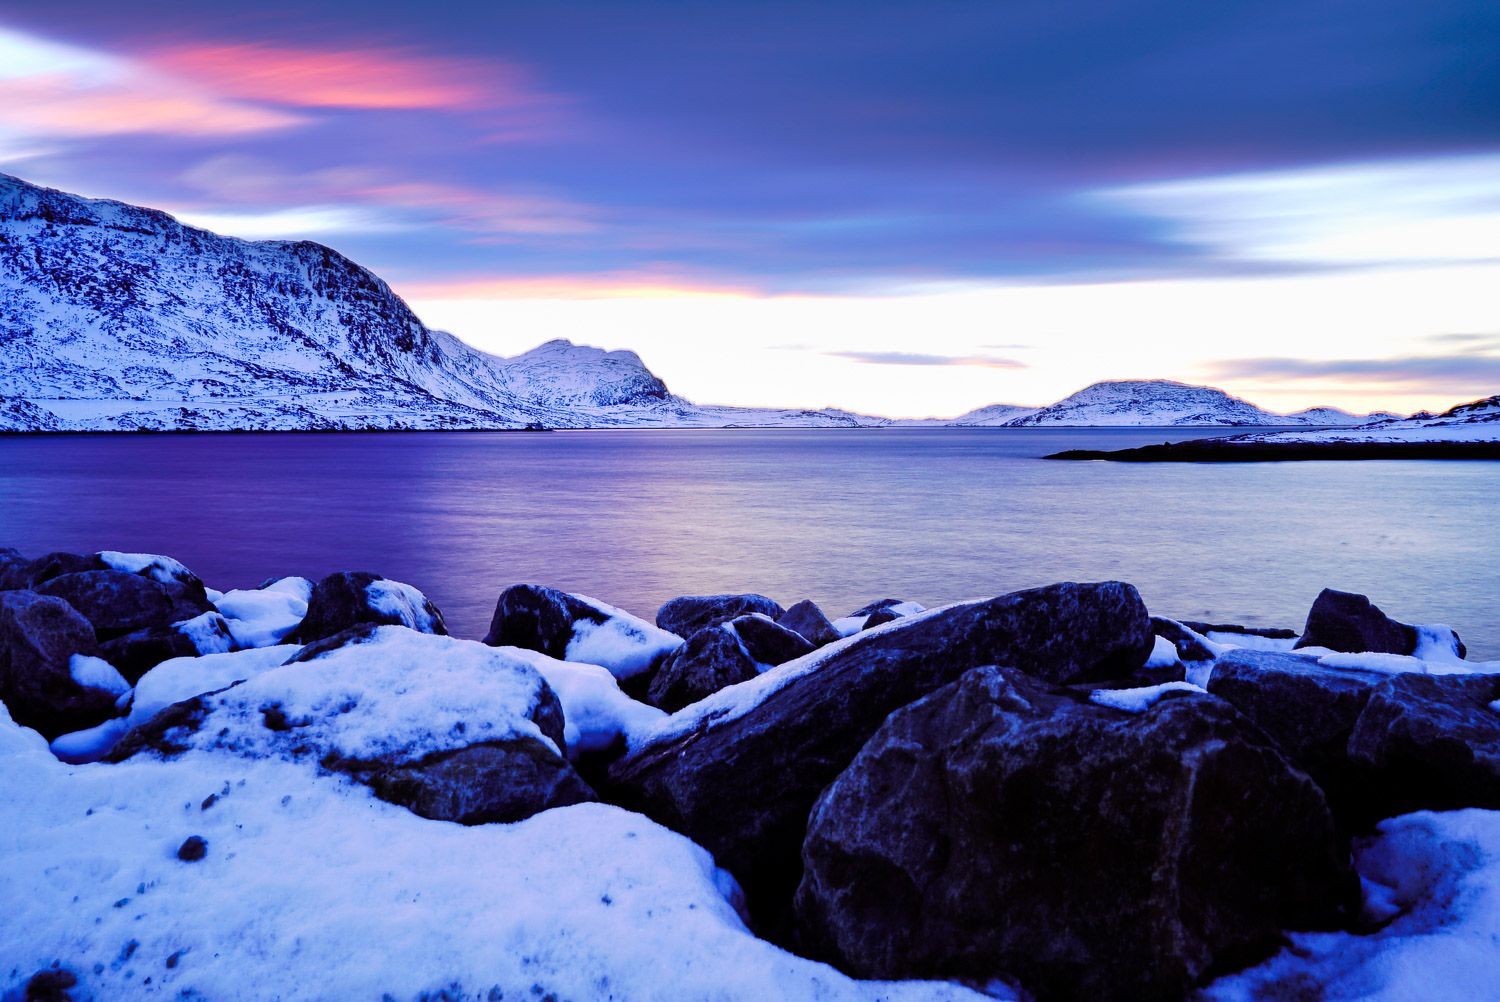 1500x1002 image that capture the barren beauty of Greenland perfectly - Matador Network on WallpaperBat